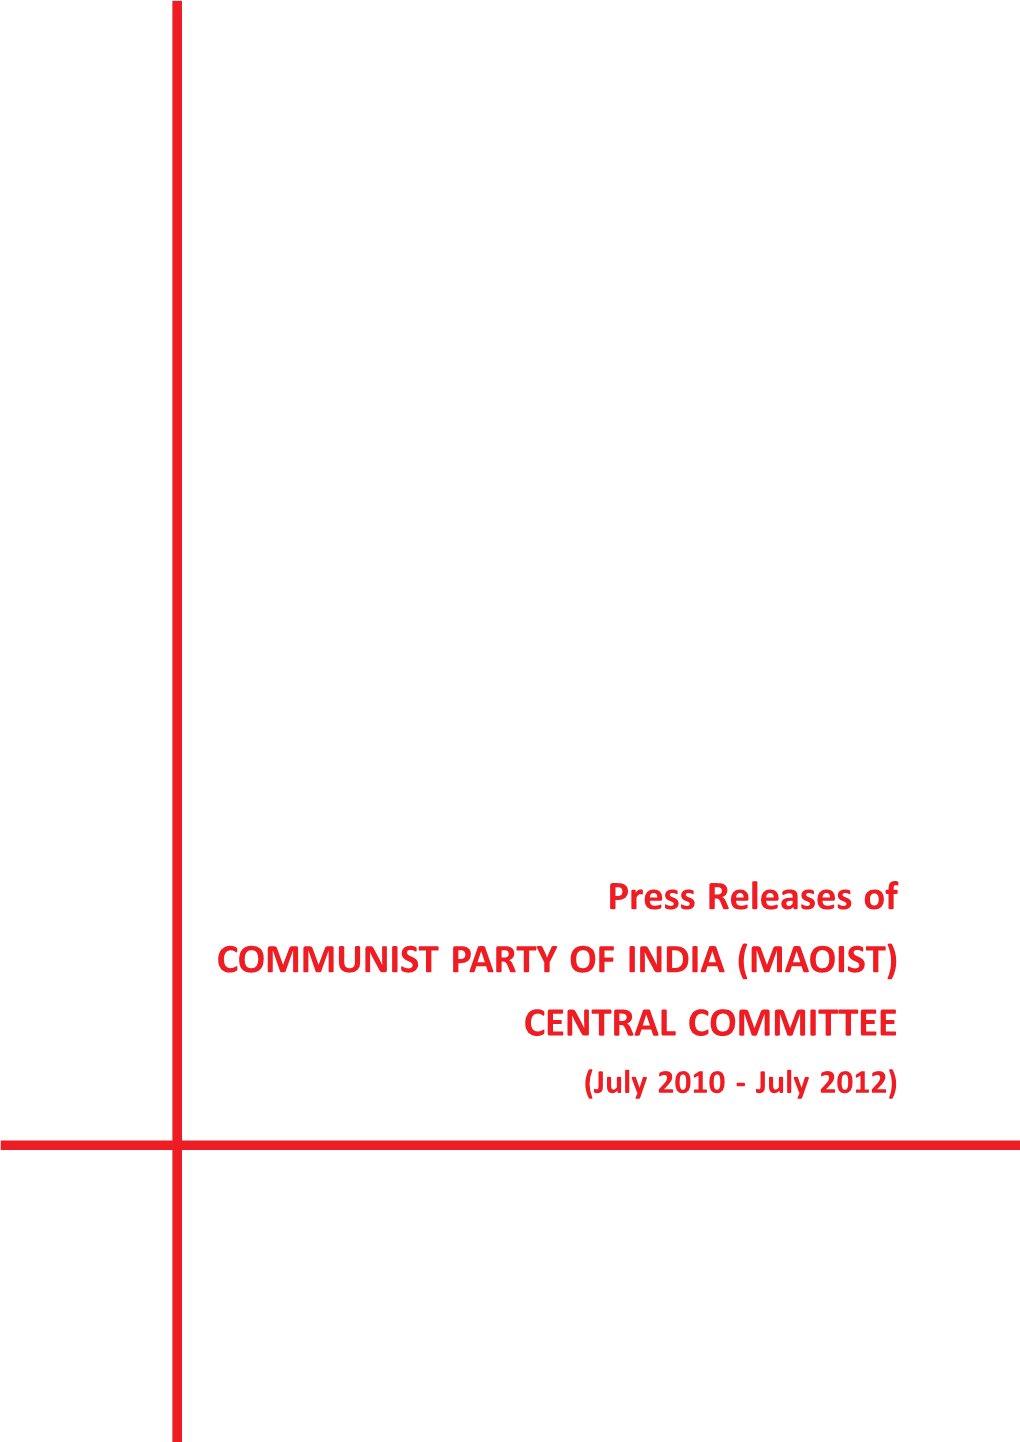 Press Releases of COMMUNIST PARTY of INDIA (MAOIST) CENTRAL COMMITTEE (July 2010 - July 2012) 2 Publisher’S Note